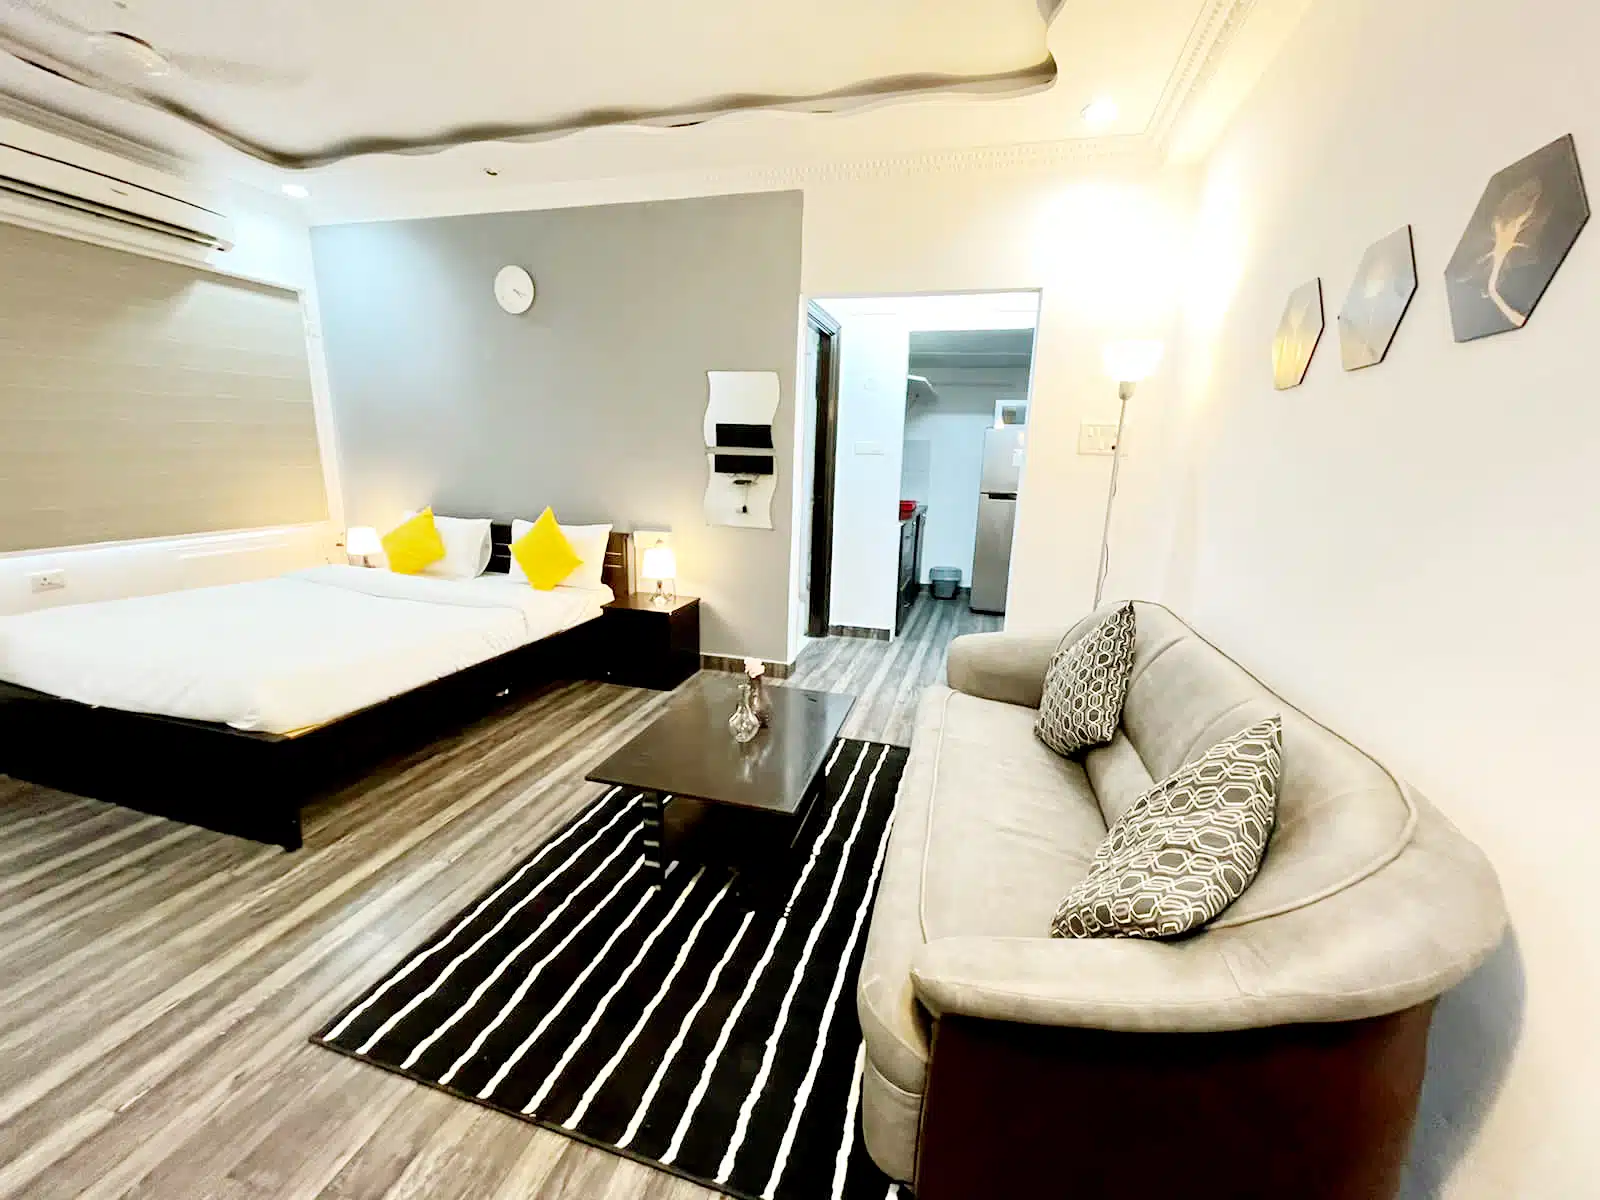 Side view of Bedroom, studio service apartment with bathtub (Jubilee hills)